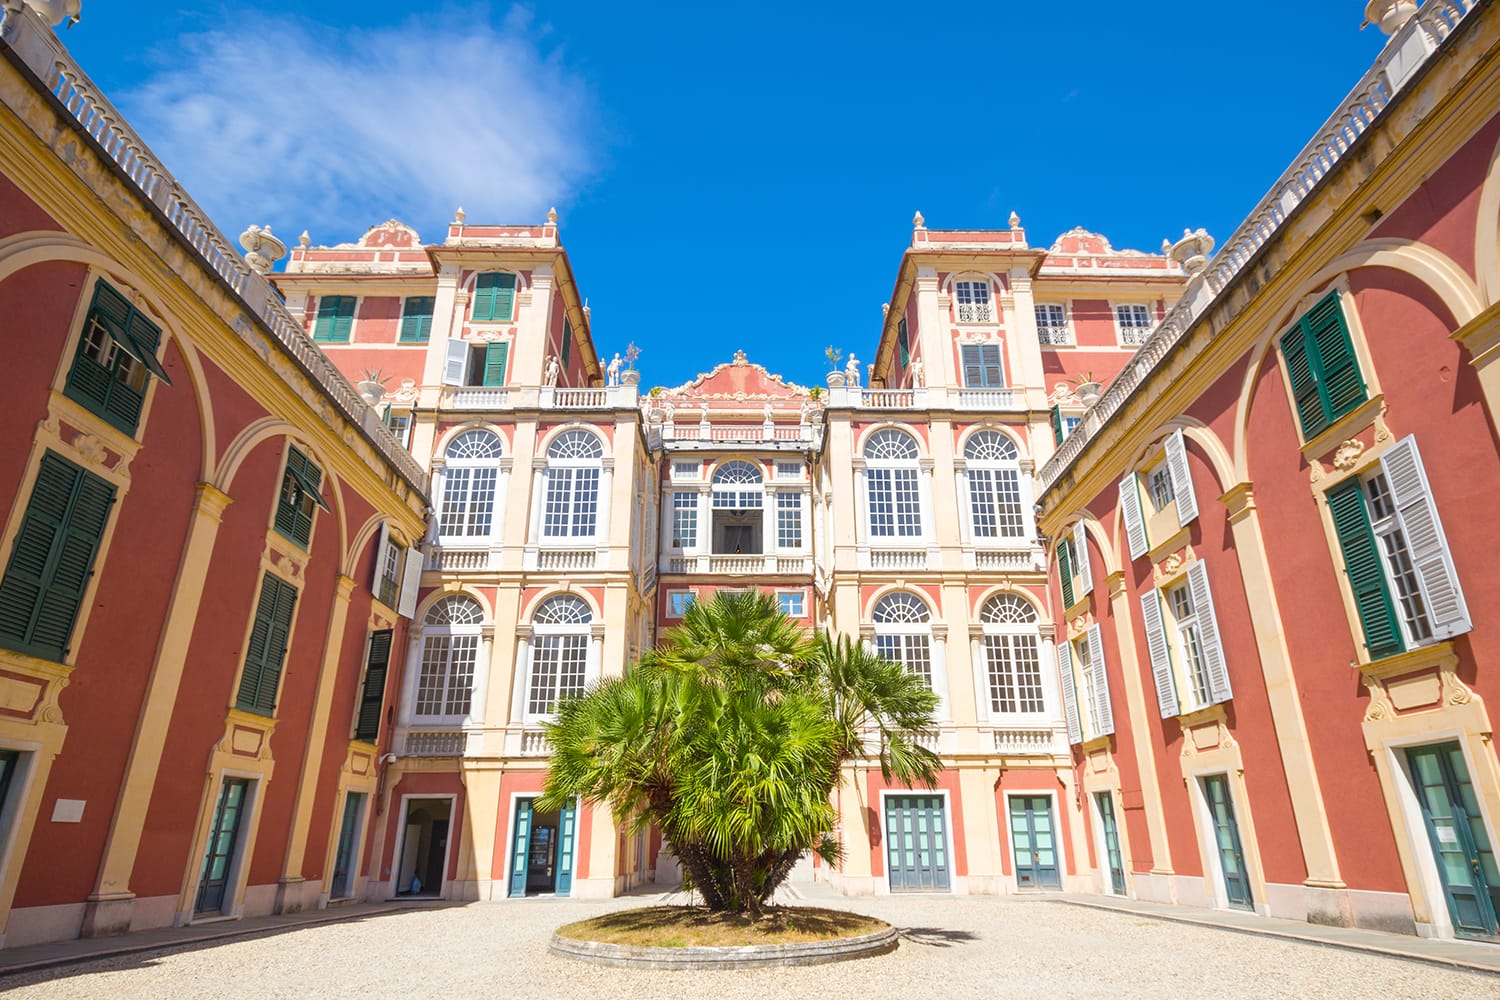 Courtyard of Palazzo Reale in Genoa, Italy